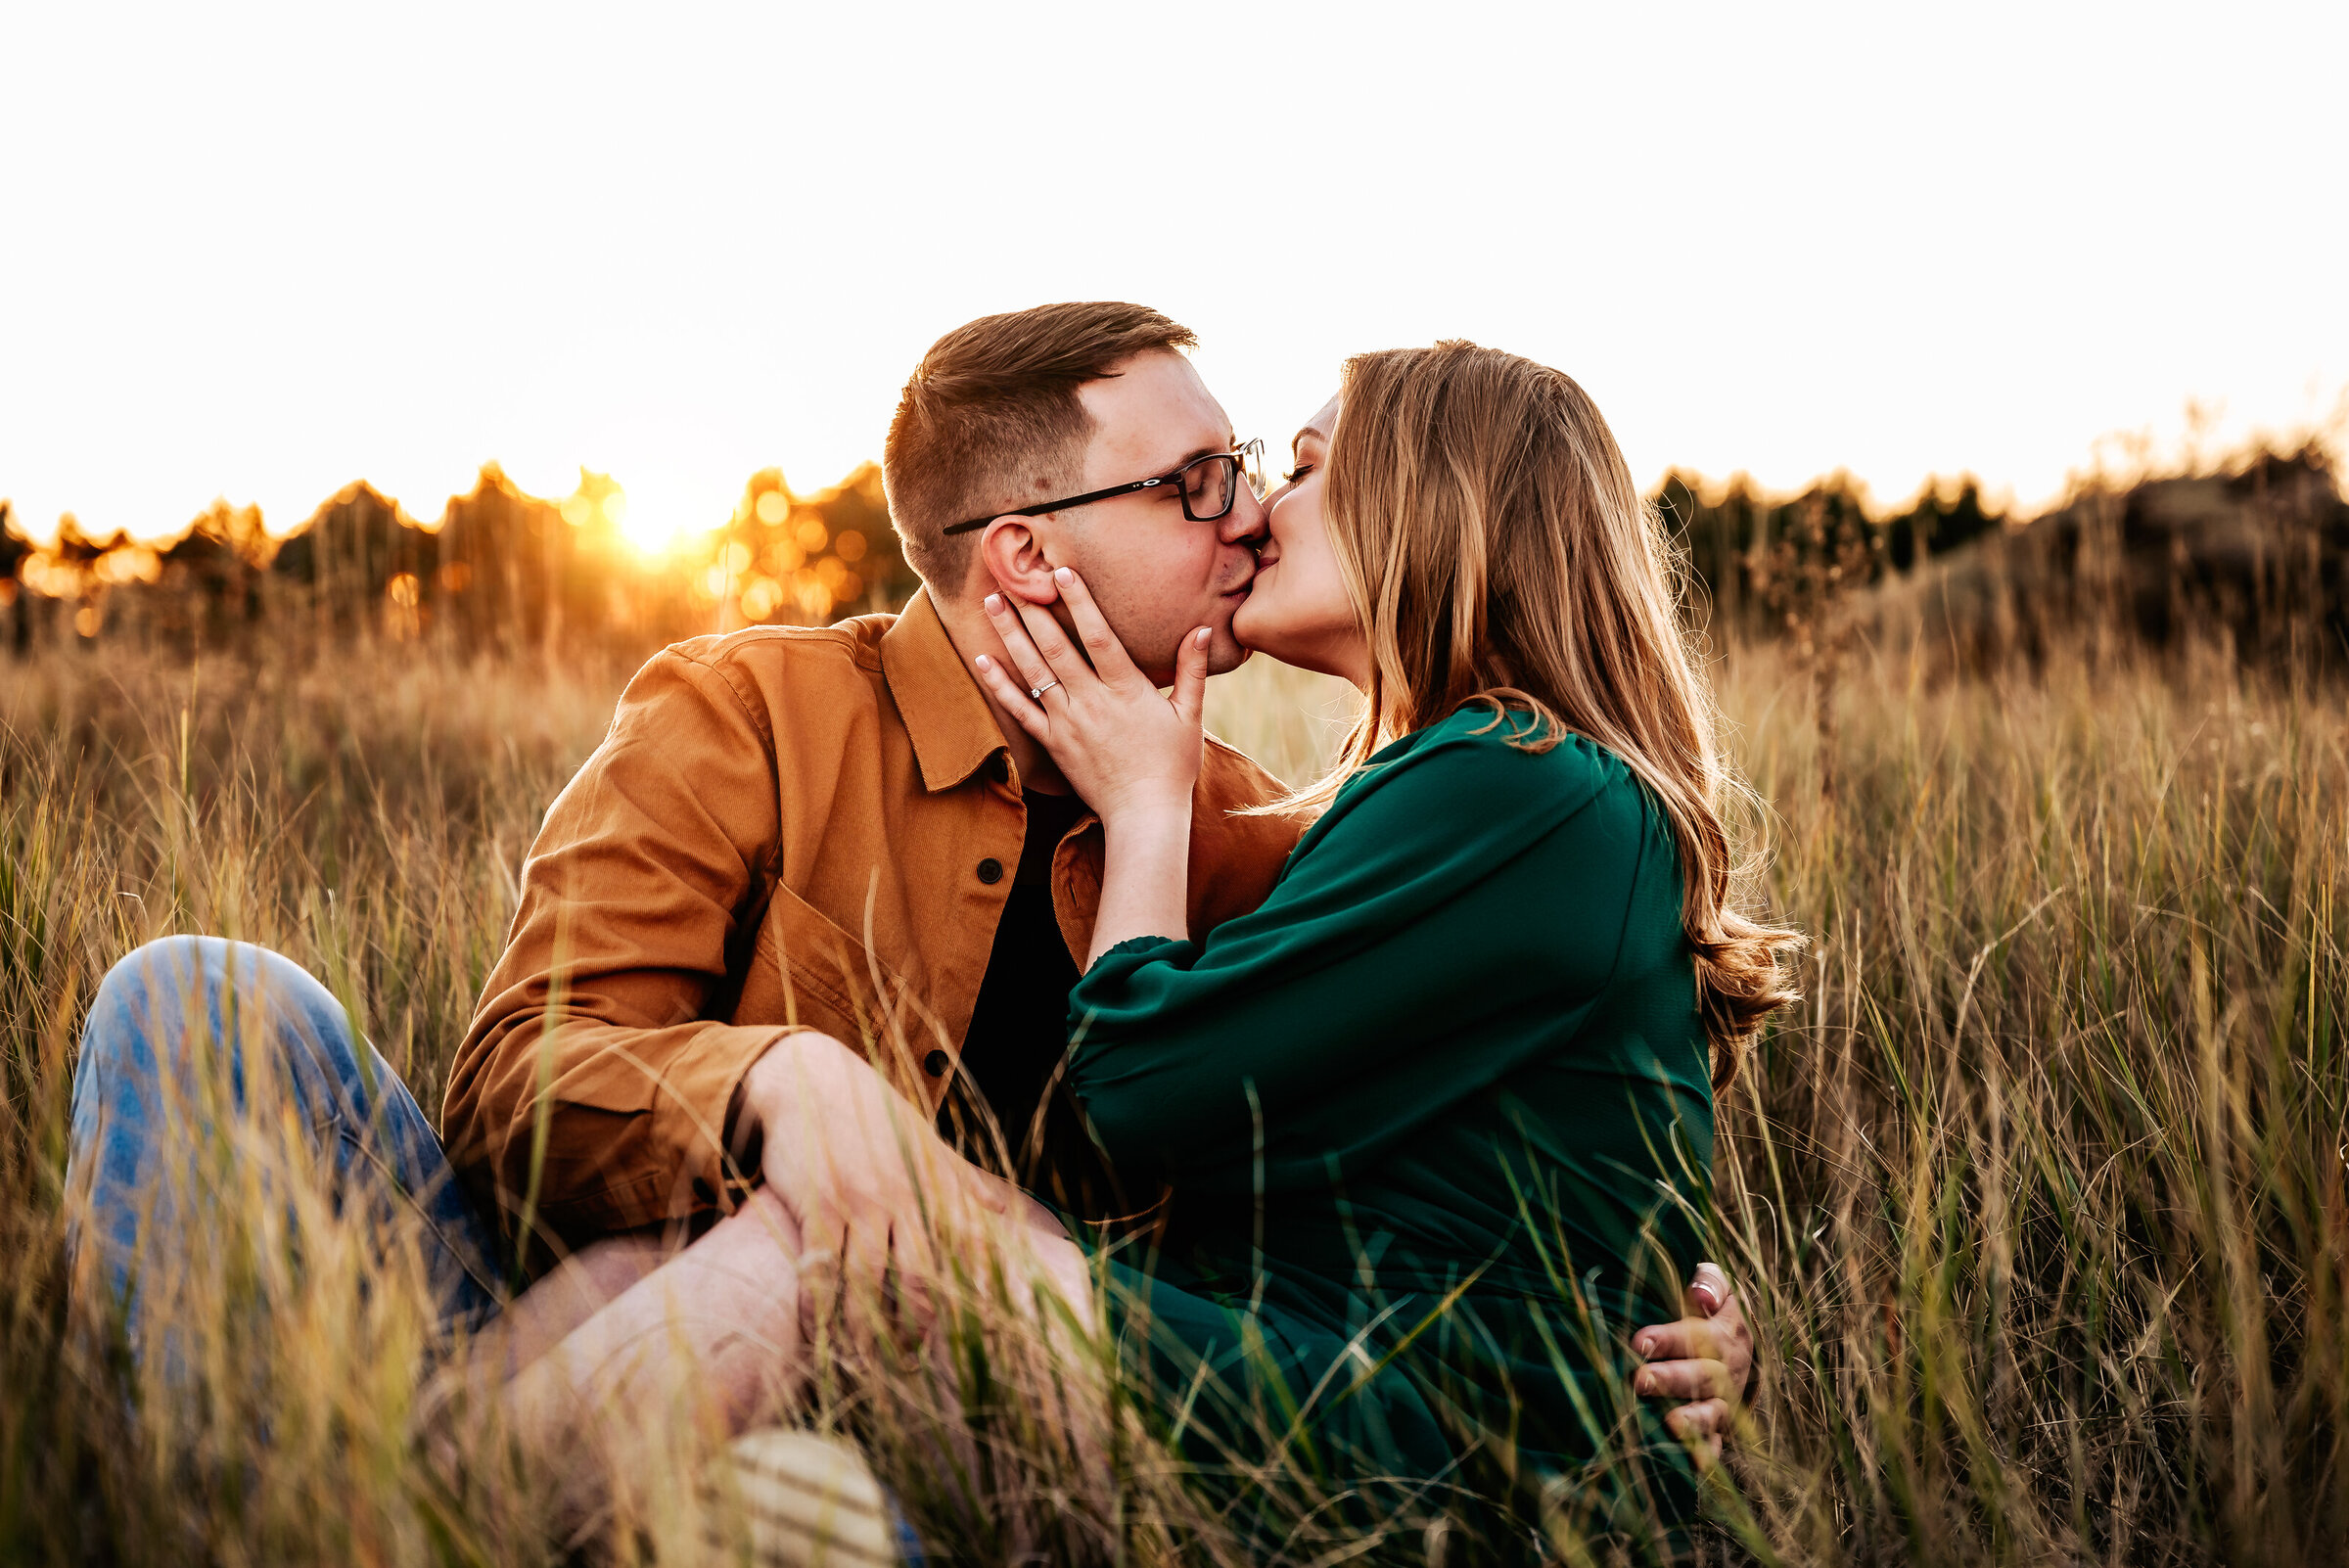 Couple sits in field of long grass and kisses each other